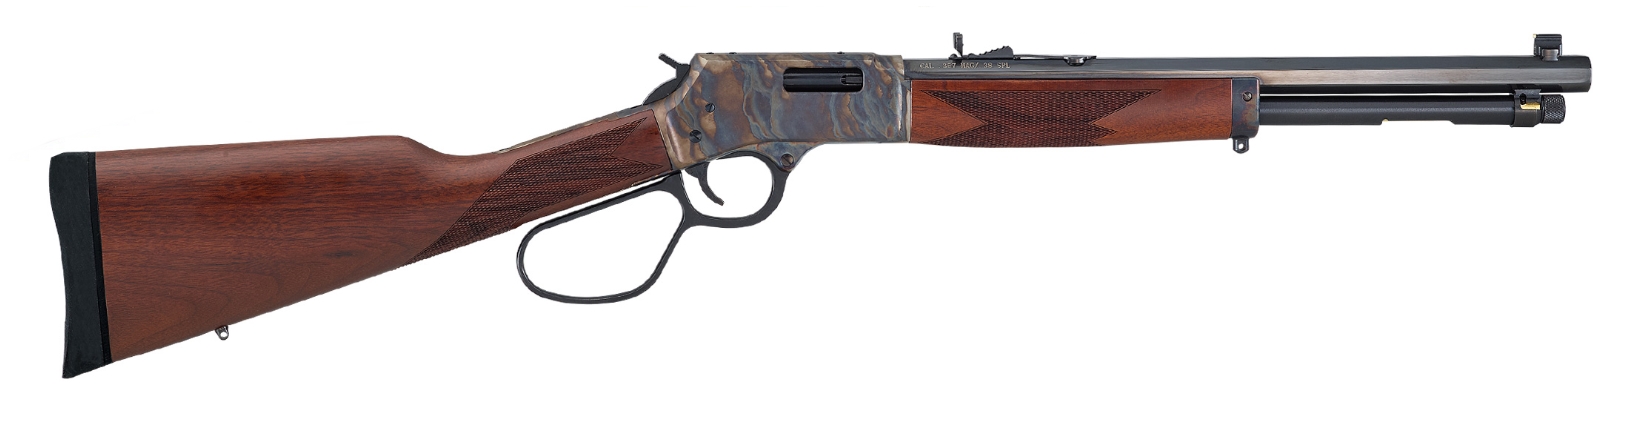 Henry Repeating Arms Big Boy Steel CCH 44 Magnum | 44 Special